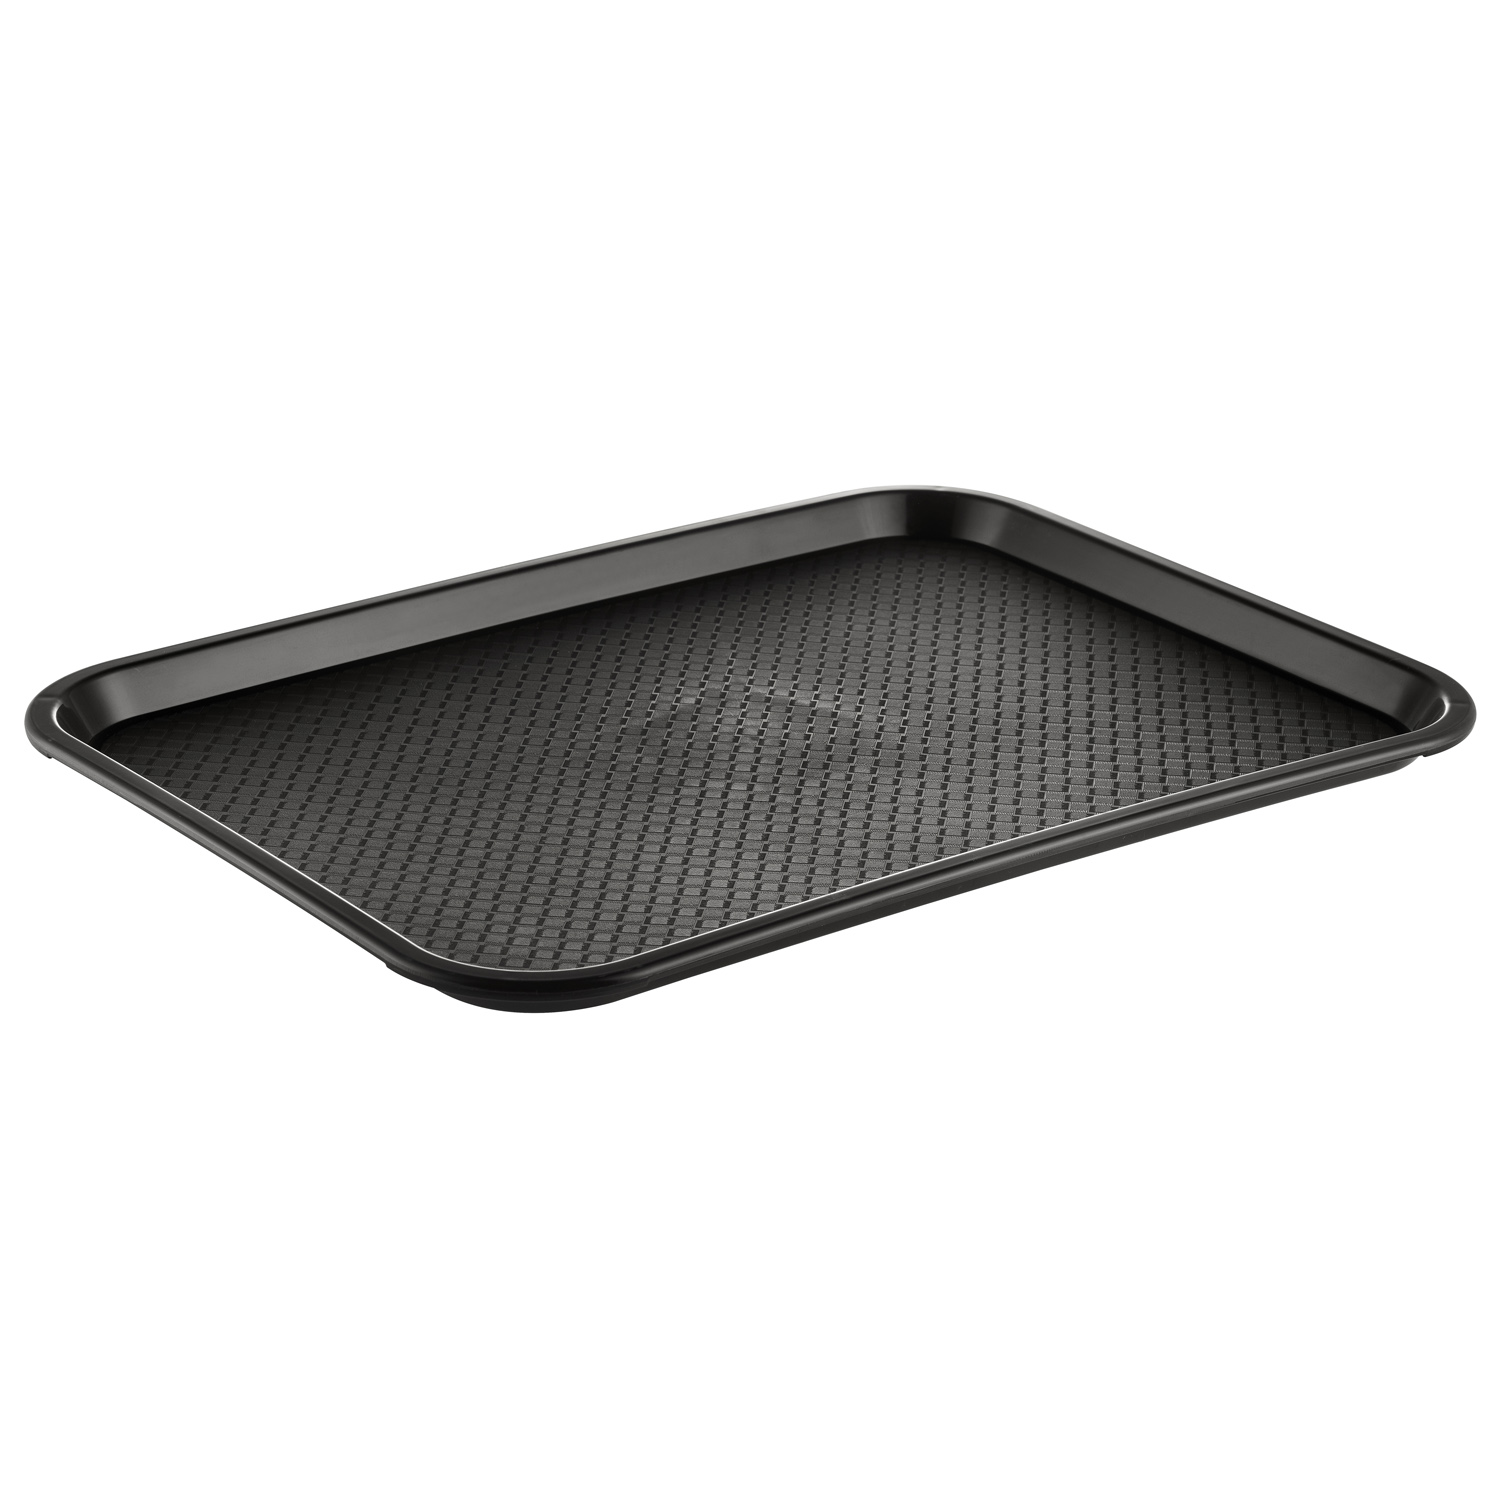 CAC China DSPT-1418K Black Fast Food/Cafeteria Tray, 18" x 14" 